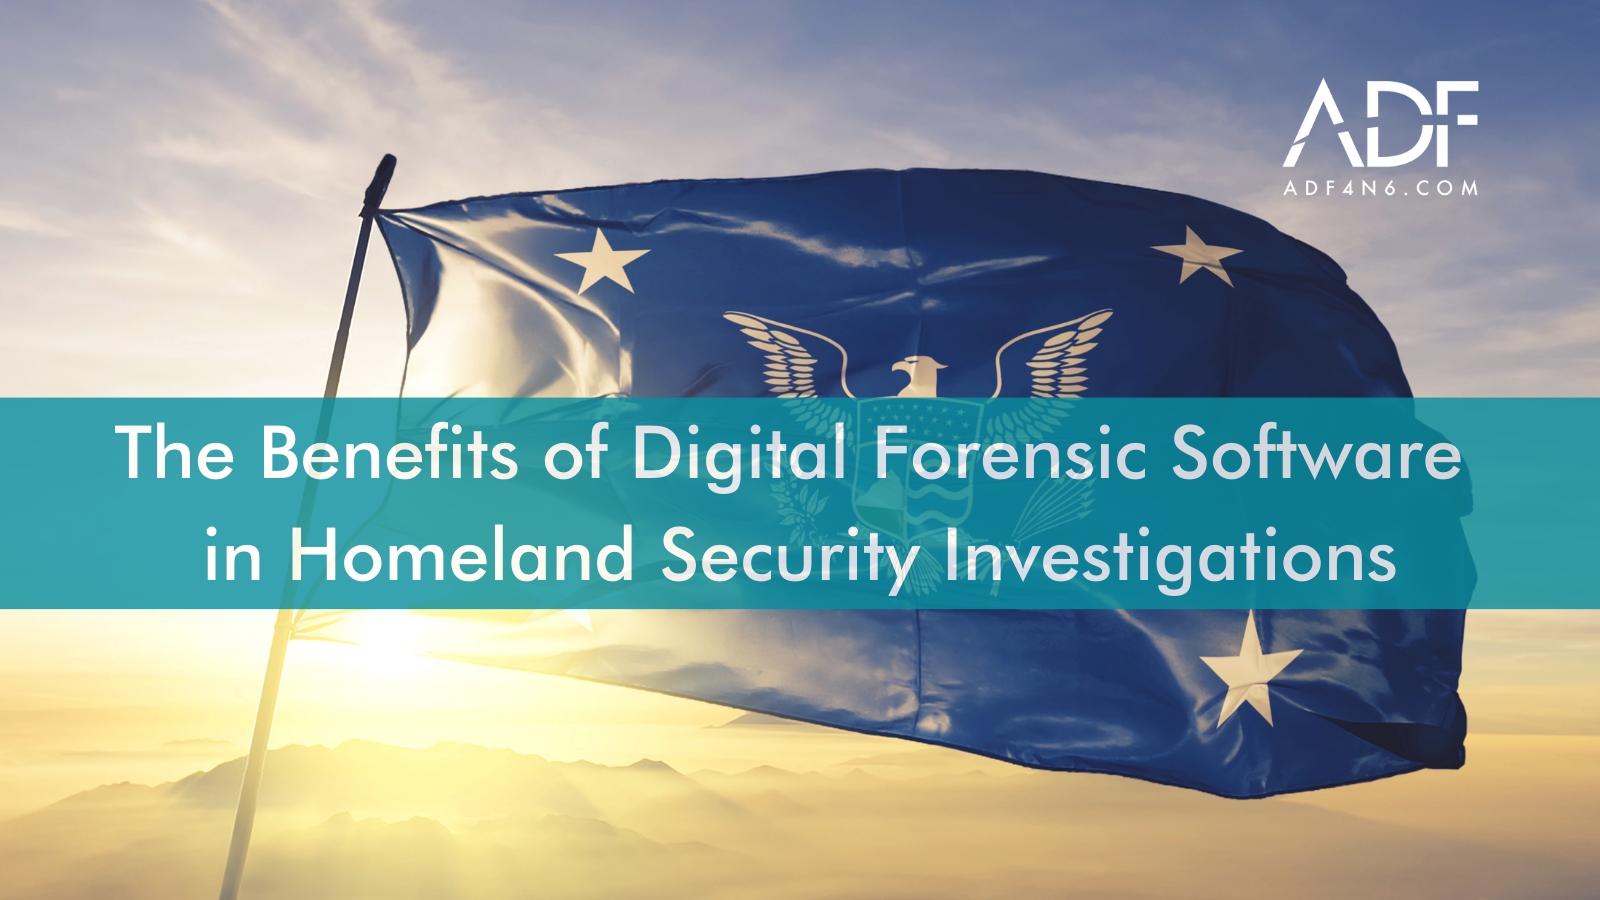 The Benefits of Digital Forensic Software in Homeland Security Cases